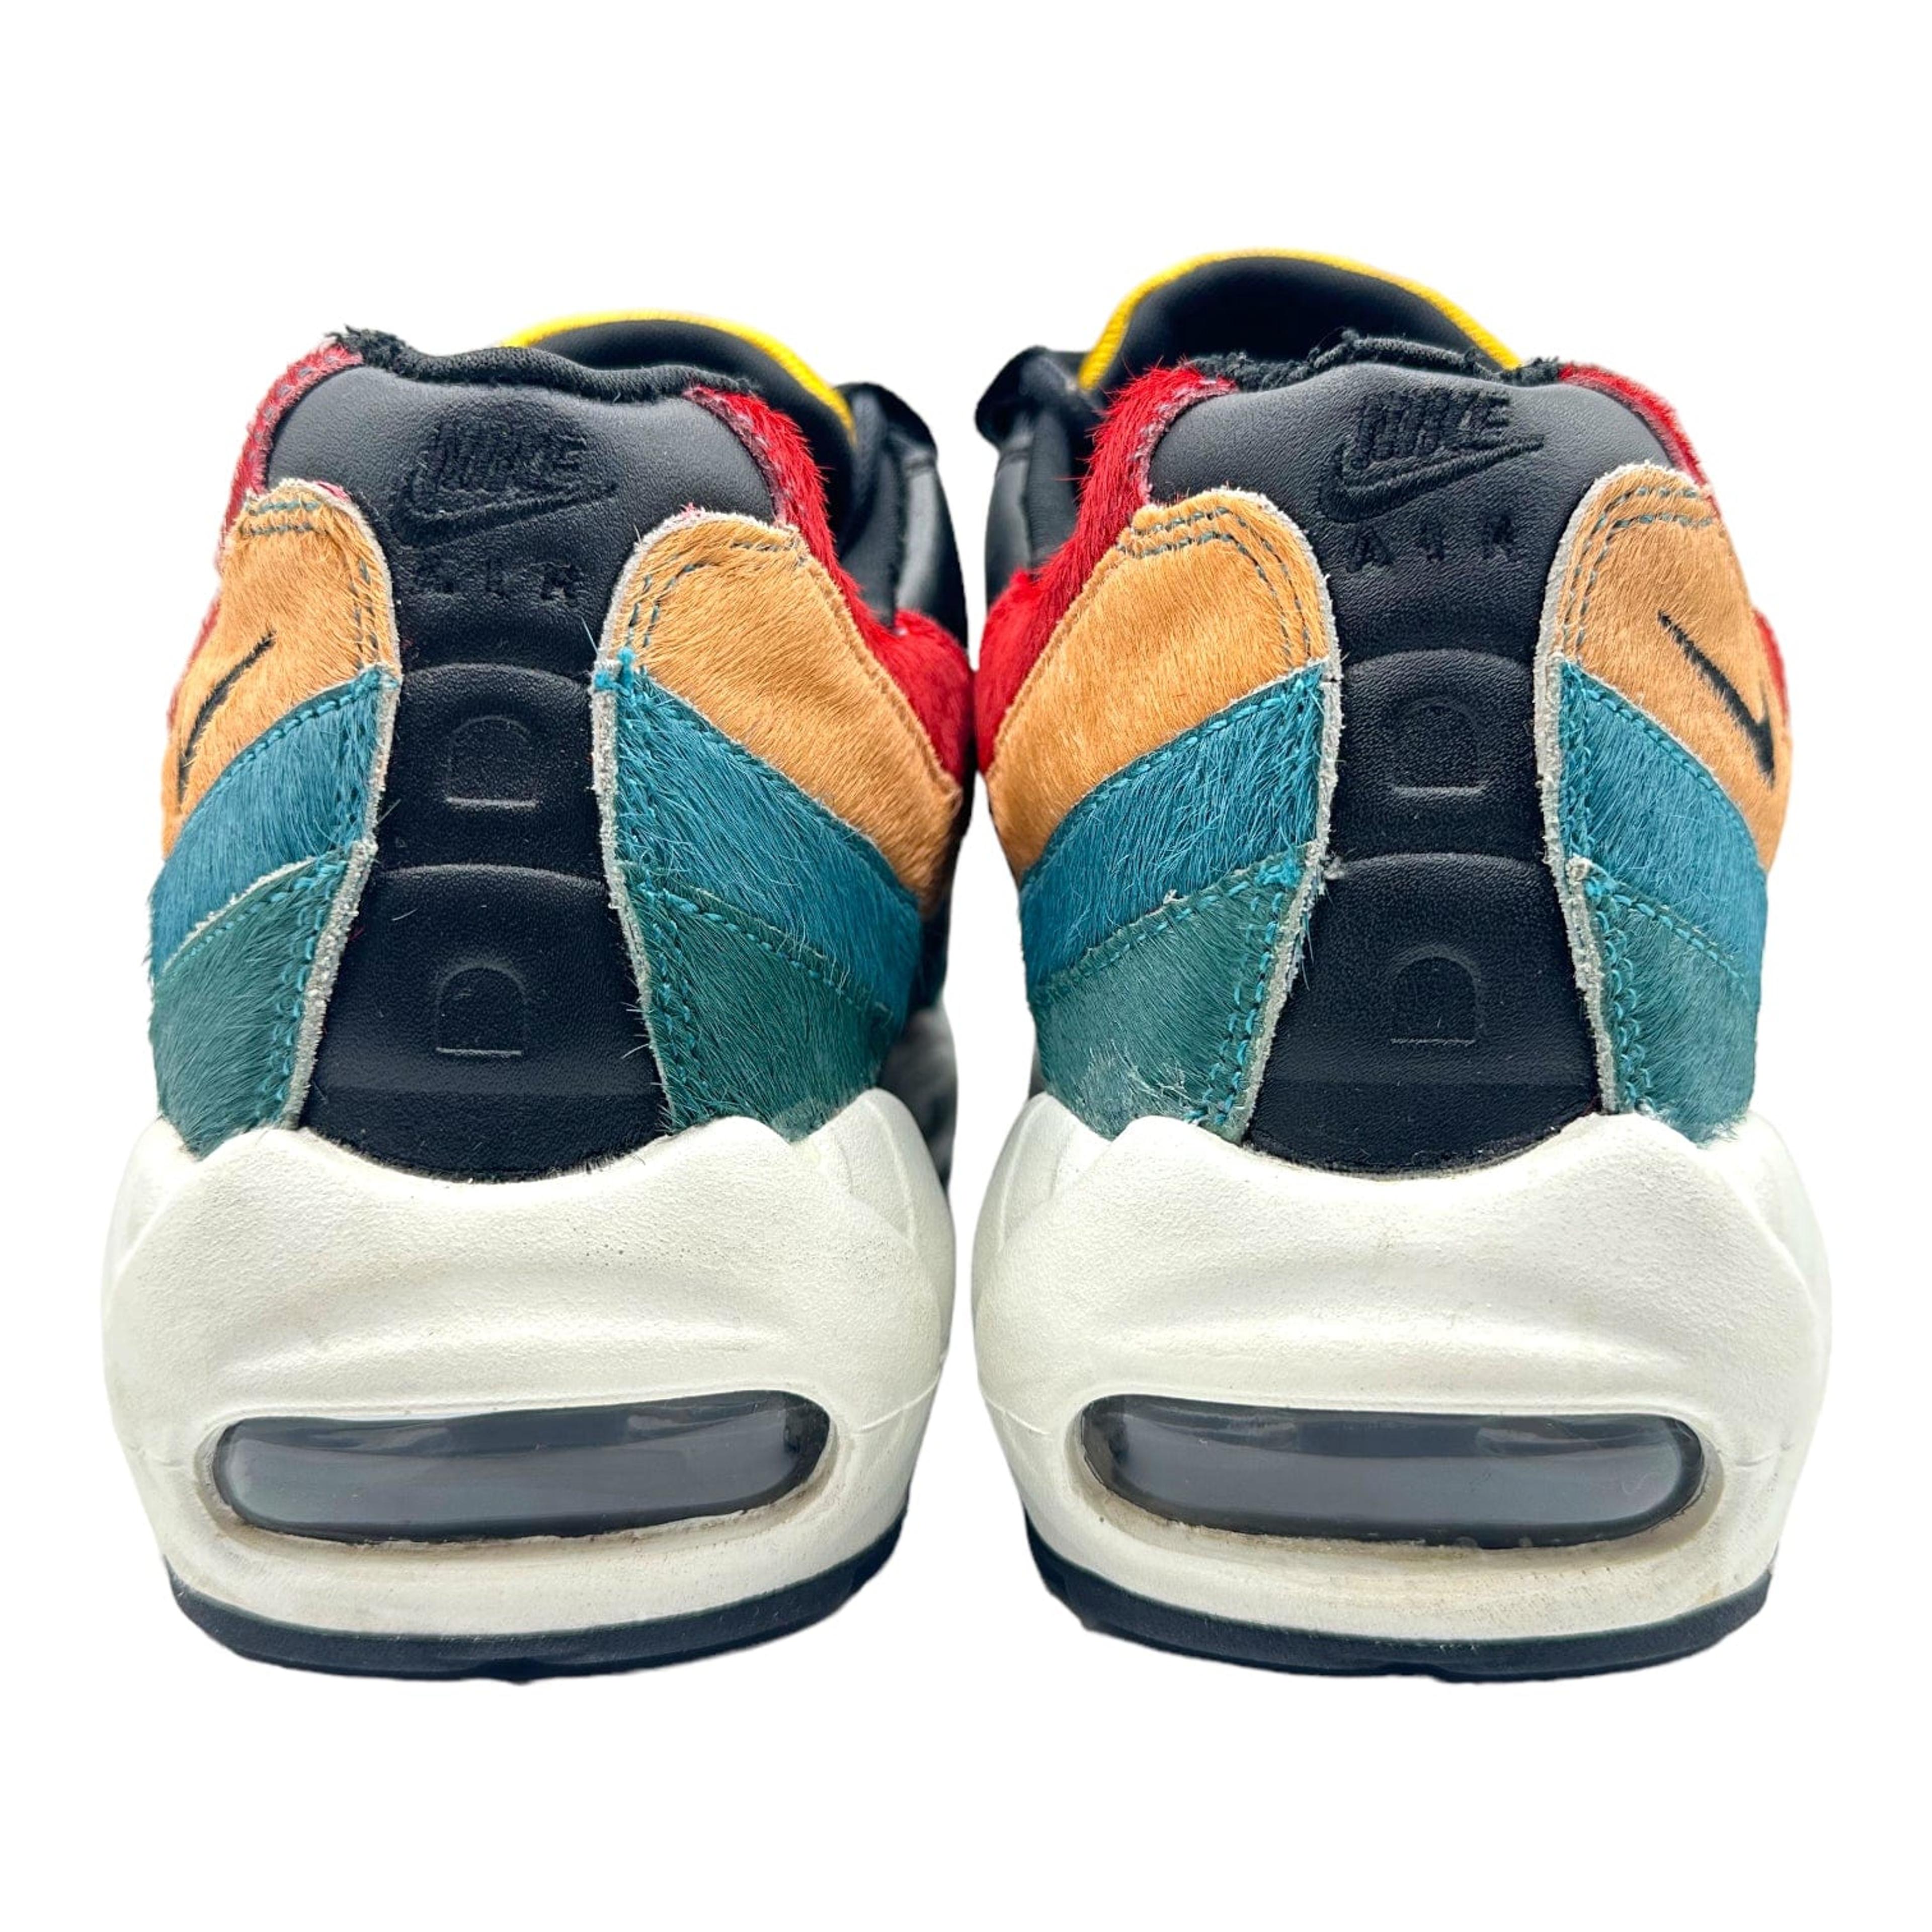 Alternate View 5 of Nike Air Max 95 Multi-Color Pony Hair (W) Pre-Owned